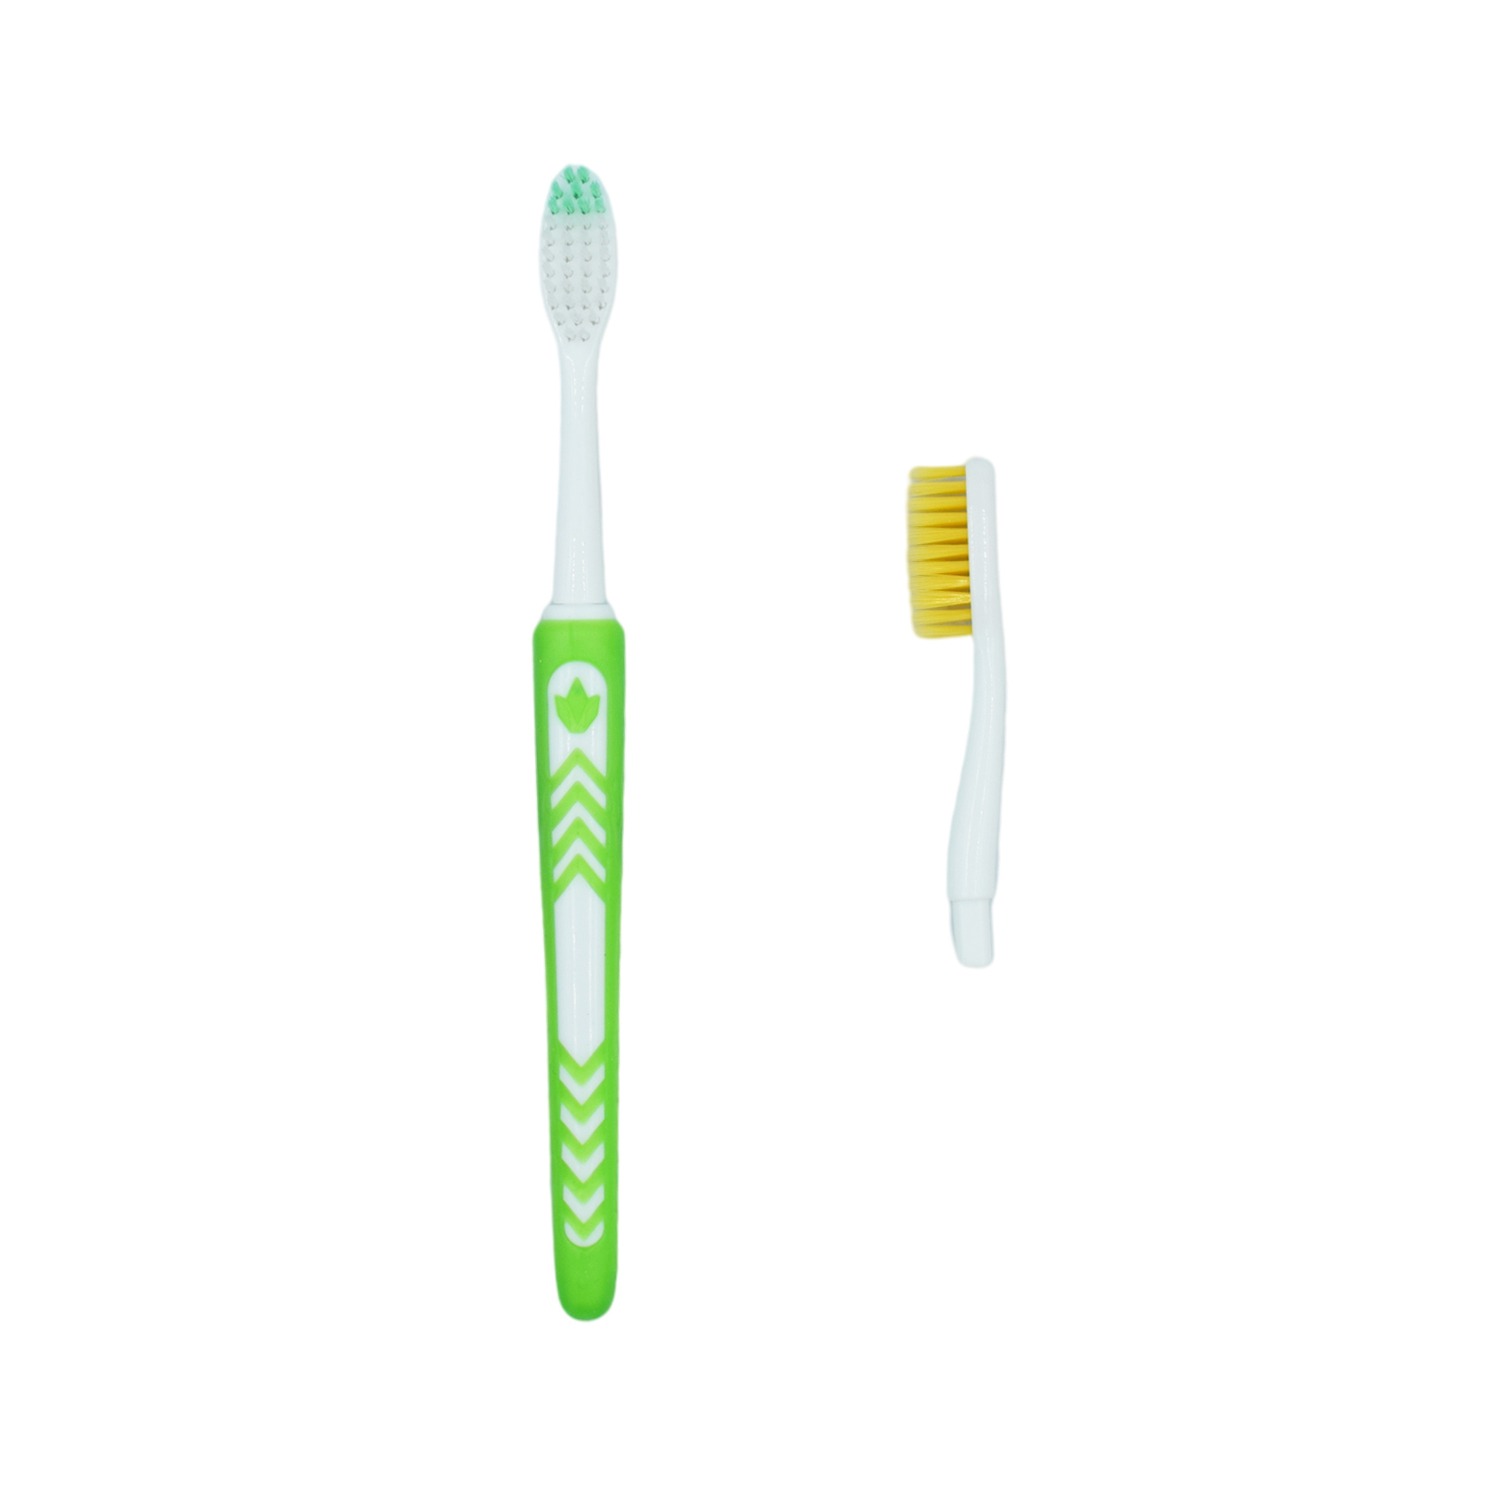 Adult toothbrush 933